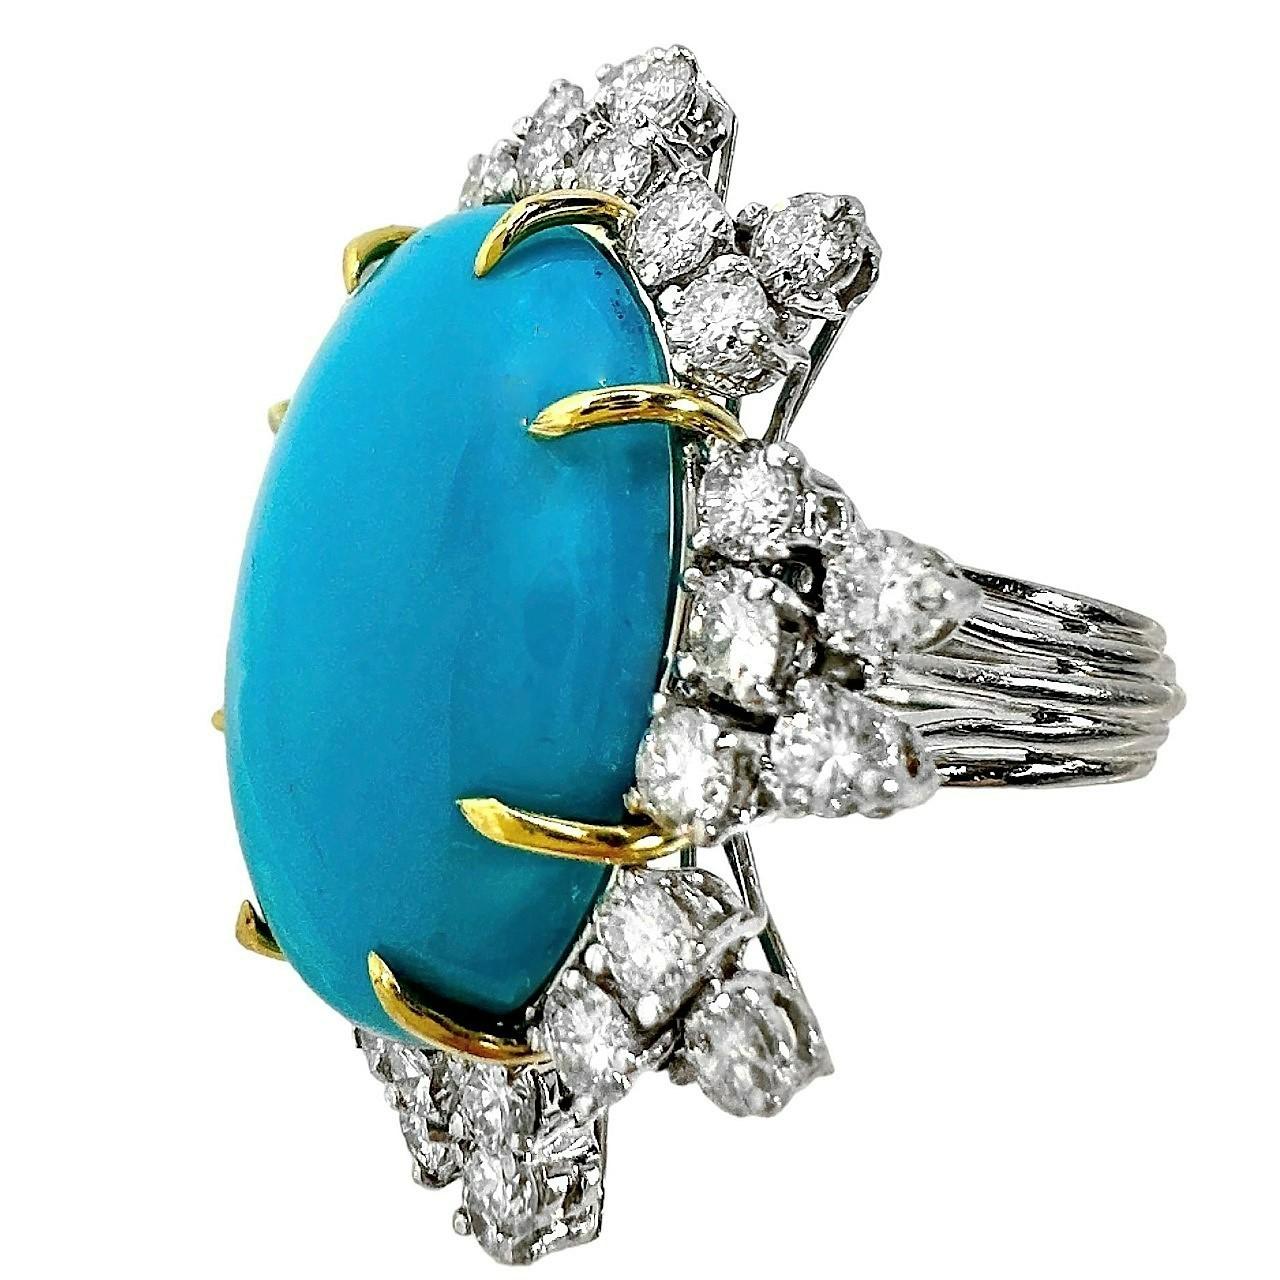 Modern Magnificent Mid-20th Century Turquoise, Diamond and Platinum Cocktail Ring For Sale